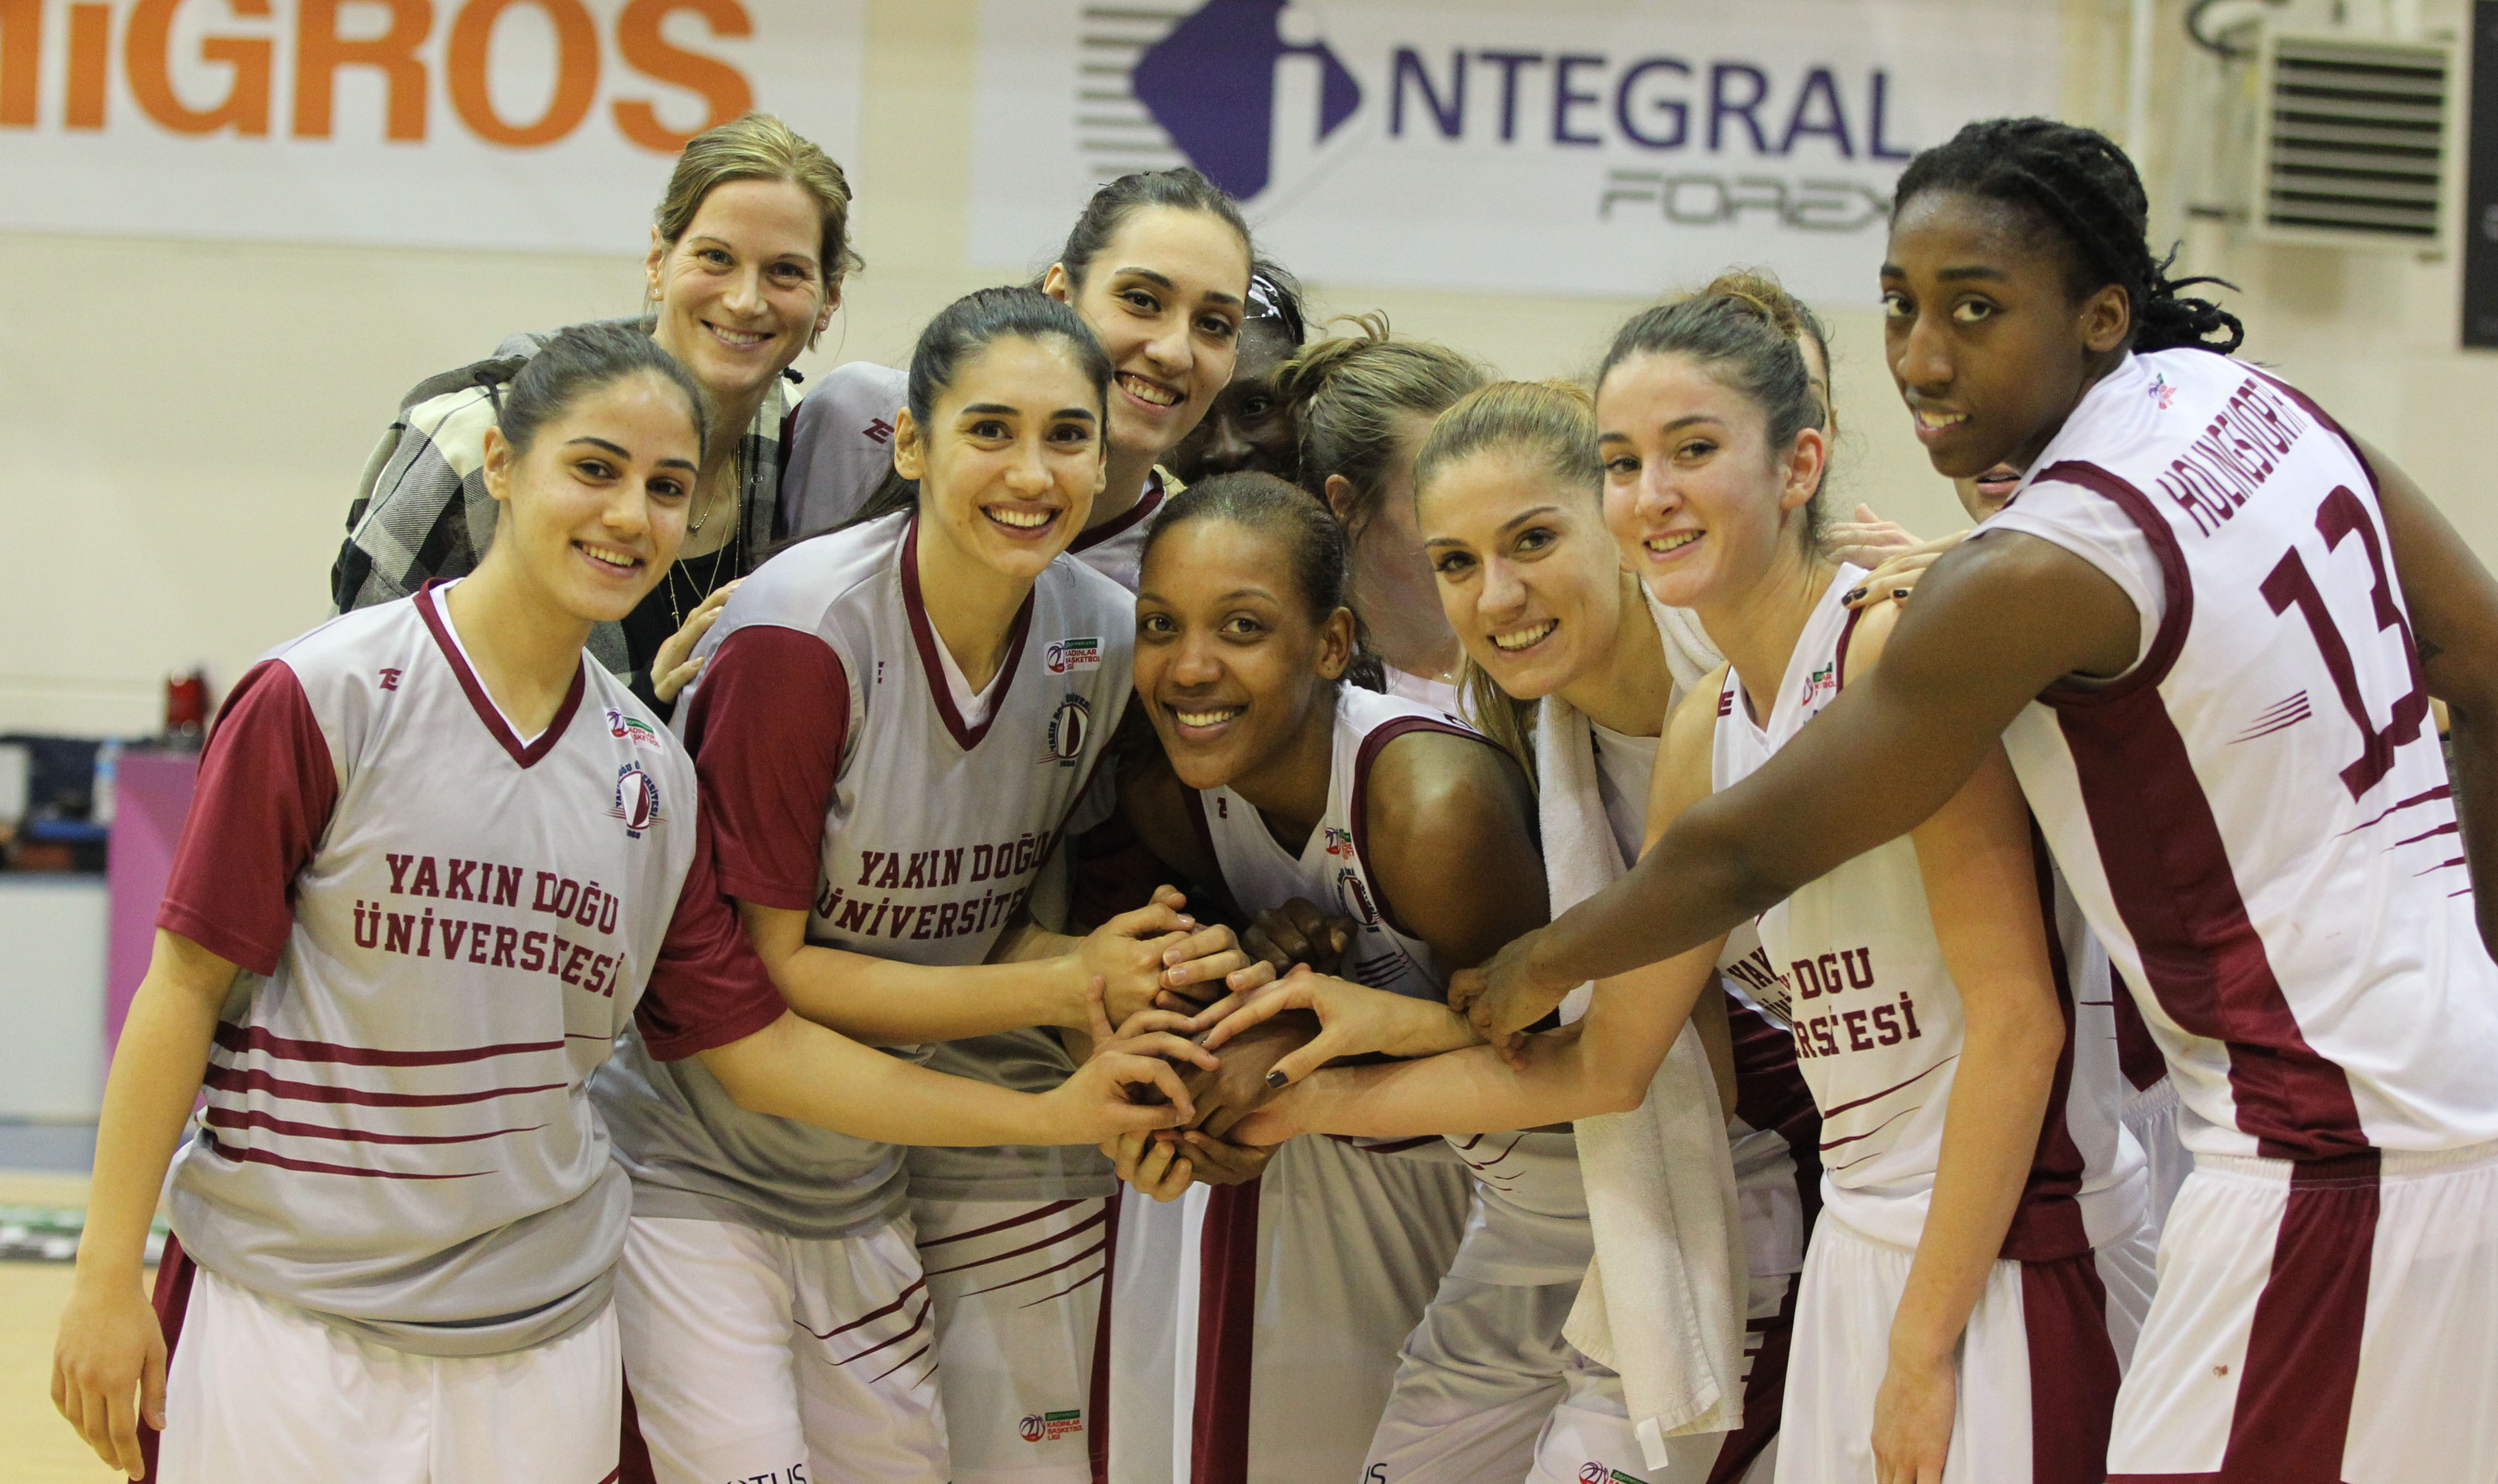 Near East Angels challenges to Rutronic Stars Kelteren in Germany in Round 2 of Eurocup